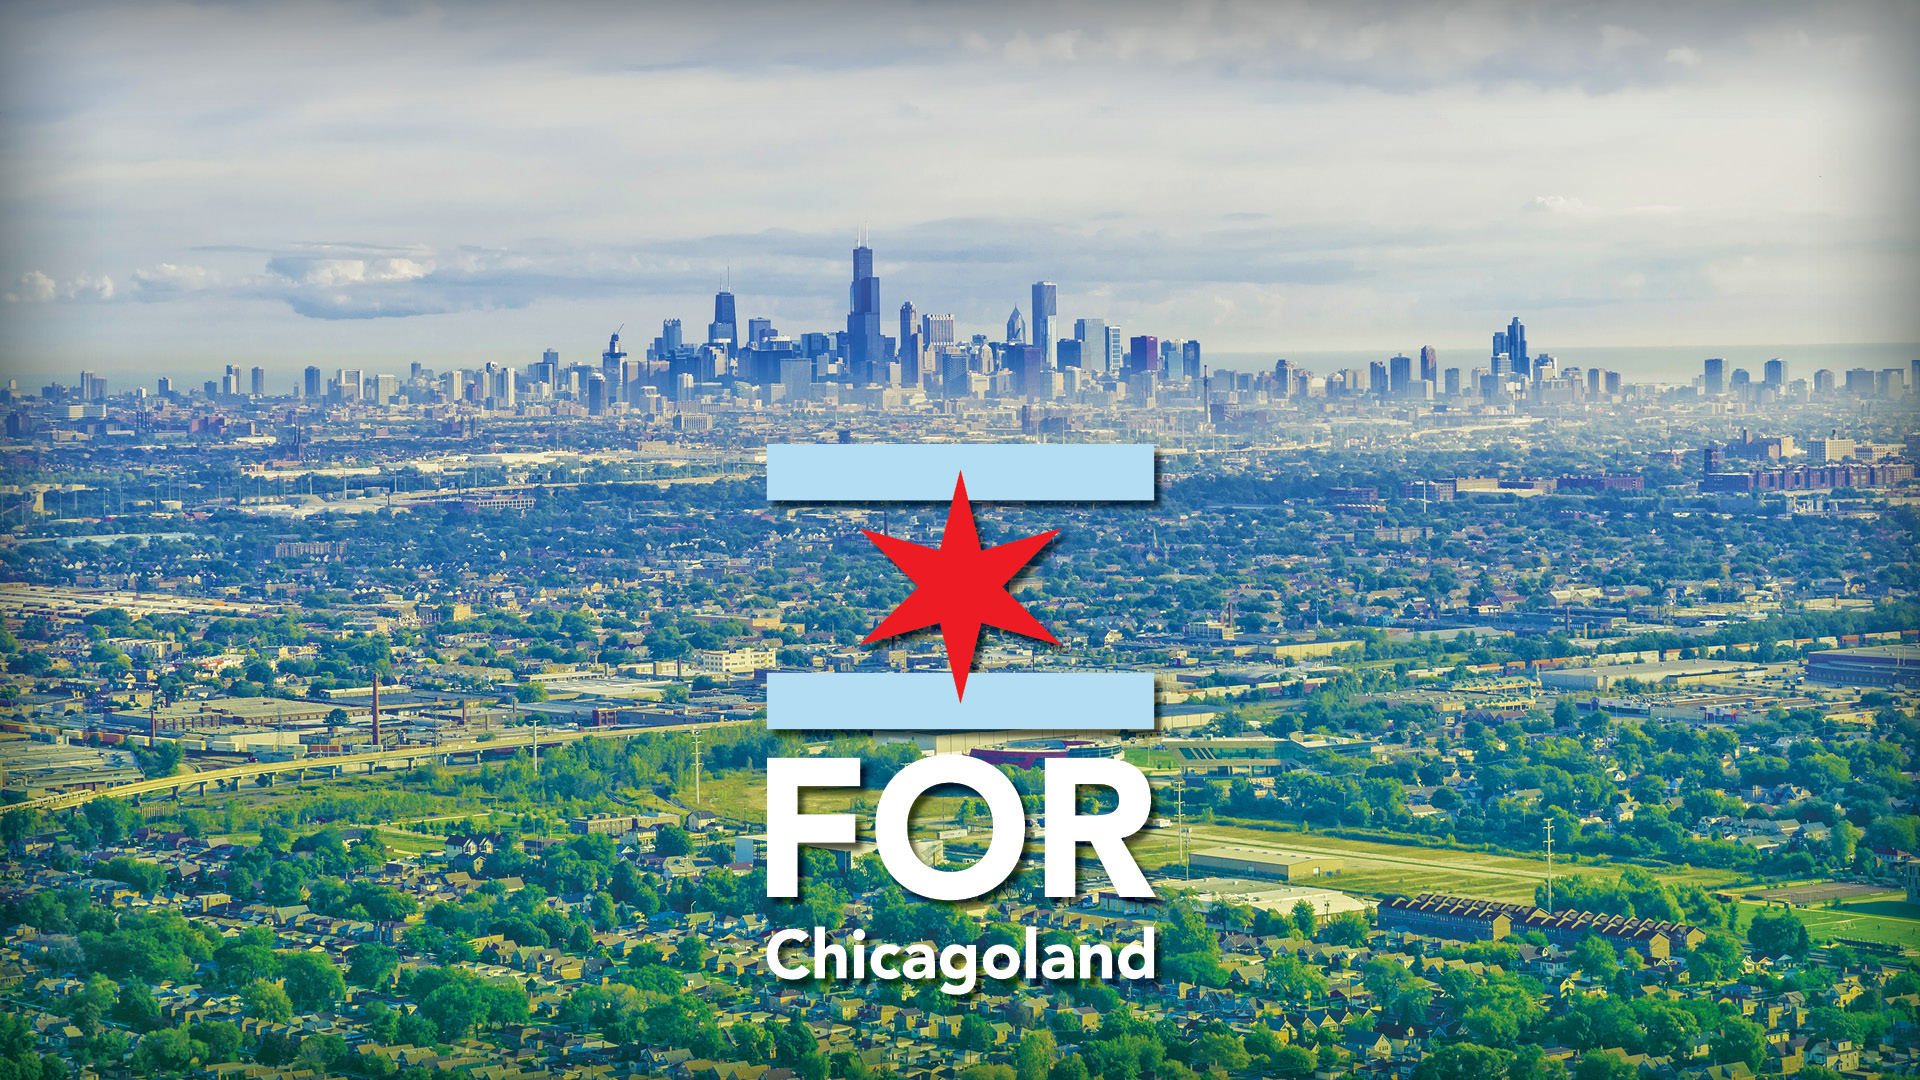 For Chicagoland | First Saturday Serve
Food & Clothing Community Projects
February 4
 
